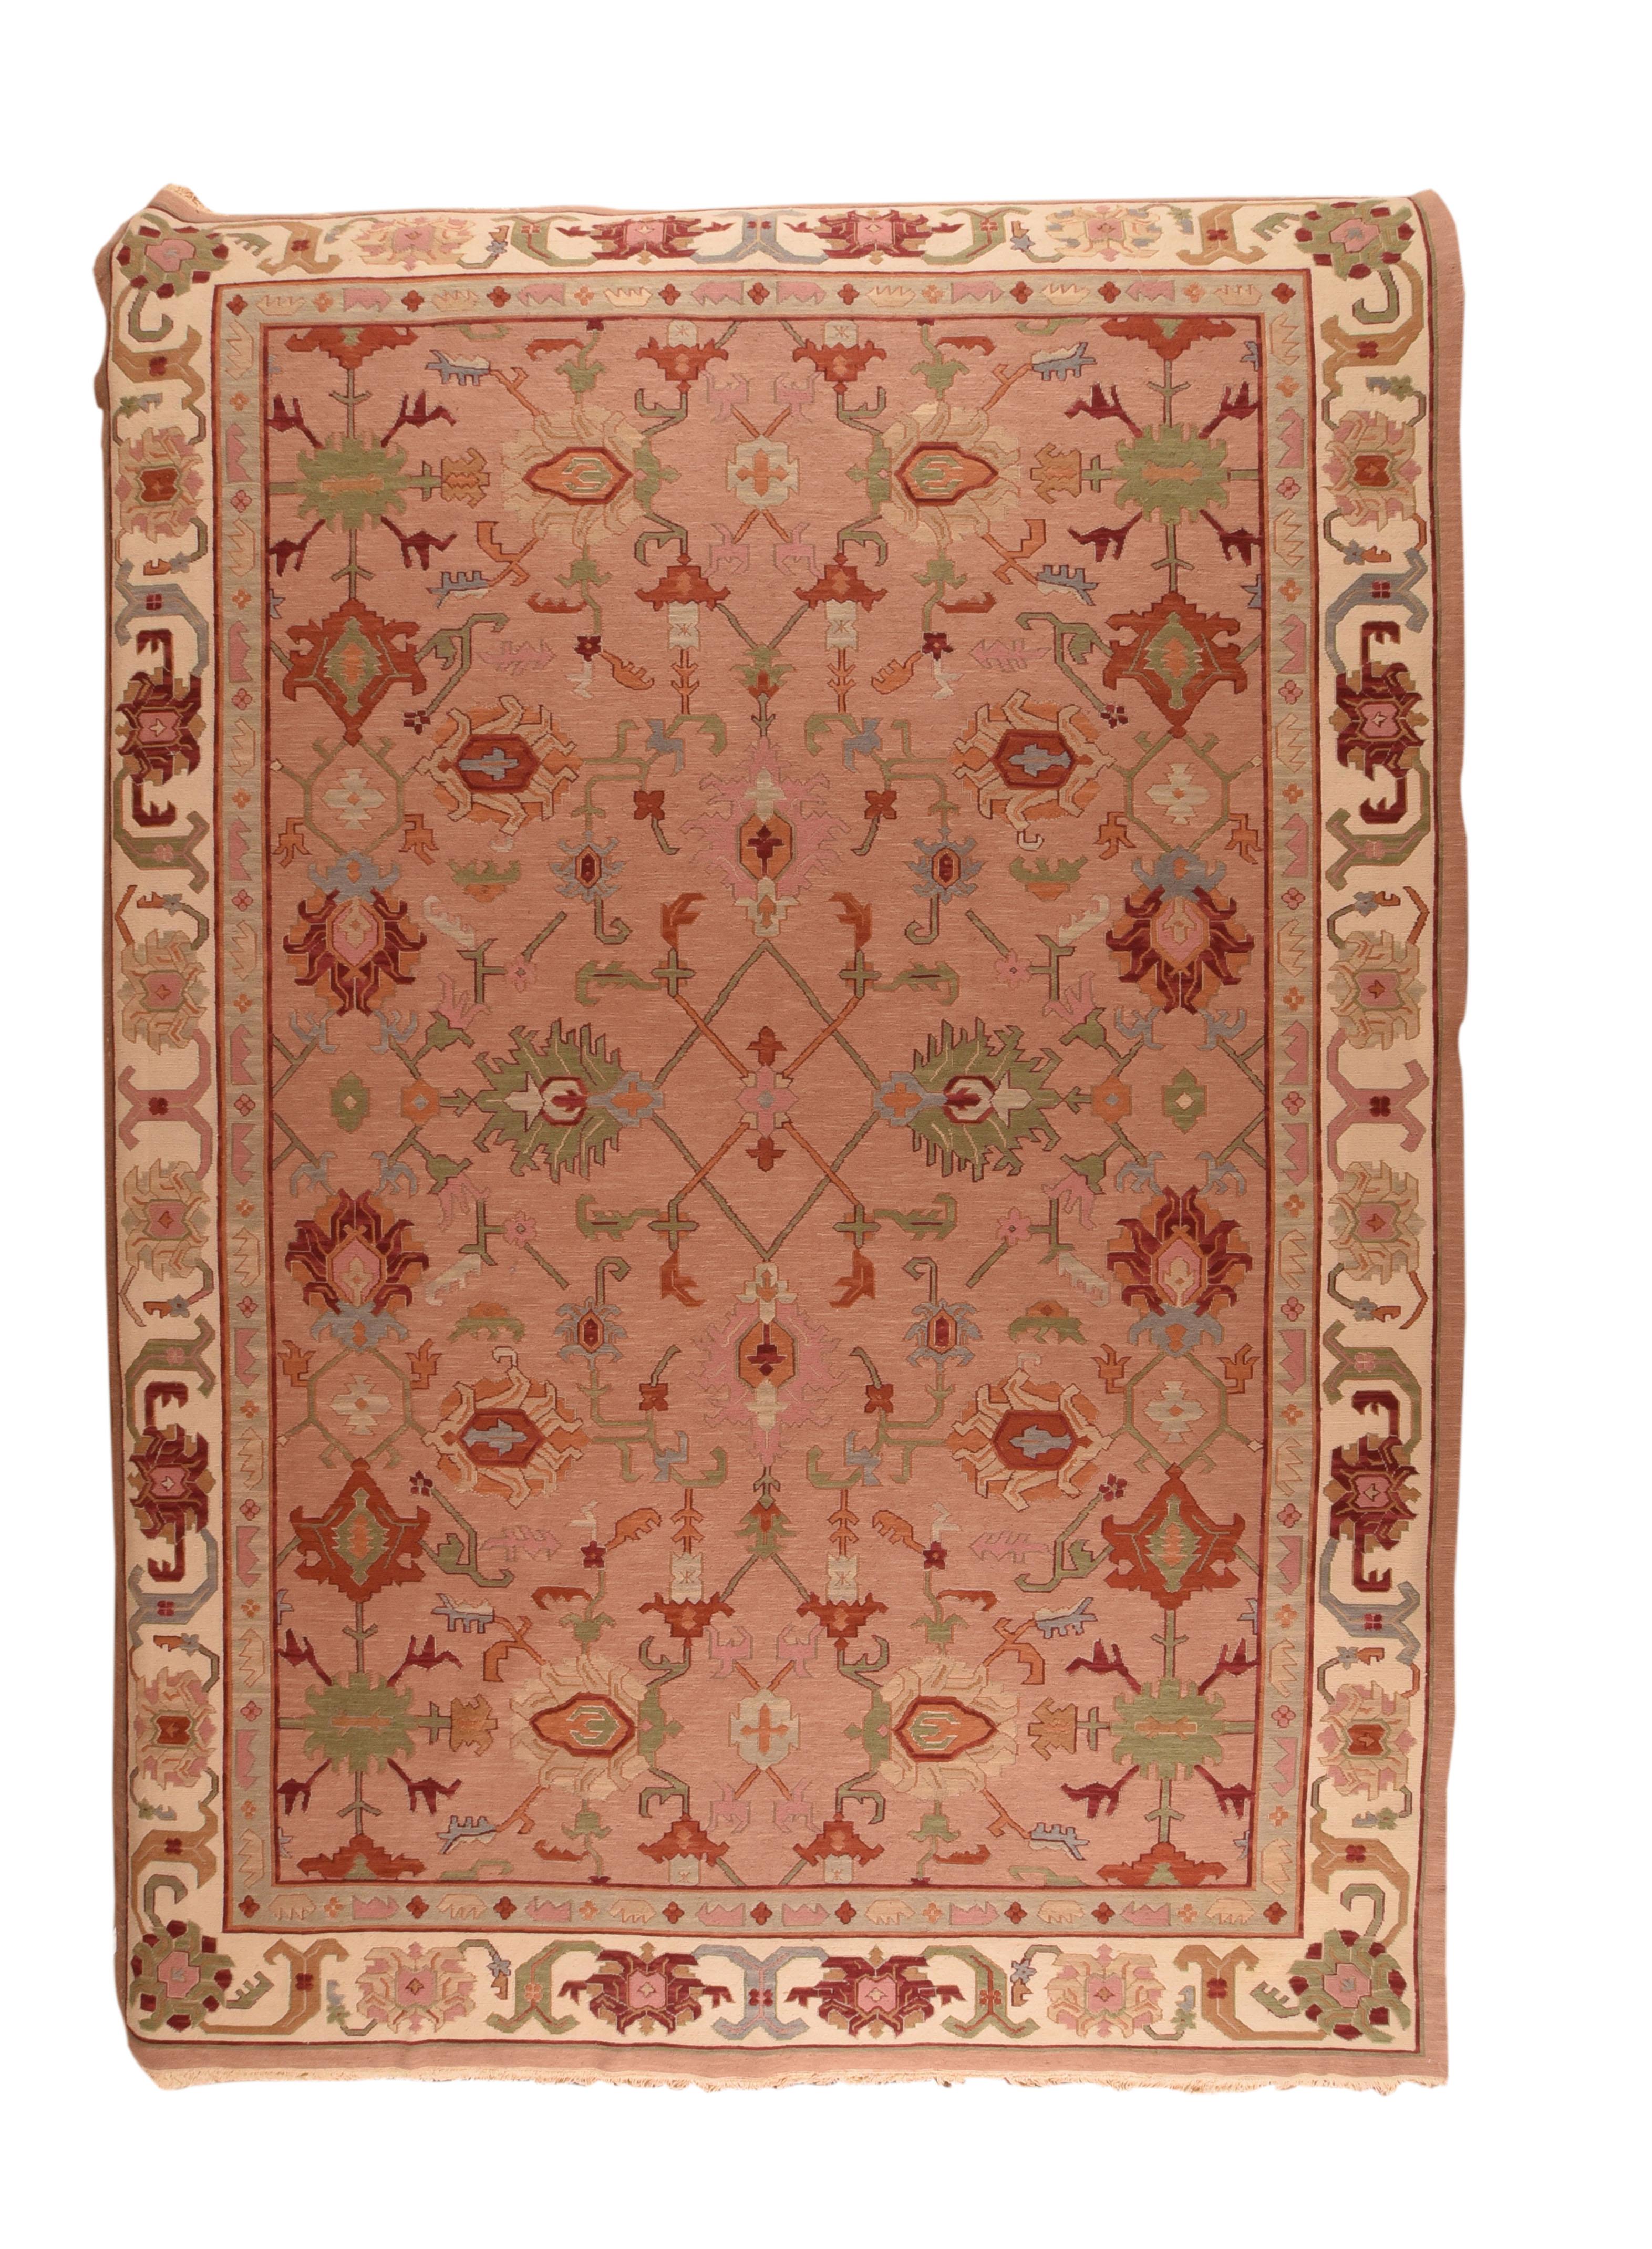 Hand-Knotted Fine Vintage Sumak Manchoria/Russian Rug, Flat-Weave Hand Knotted, circa 1970s